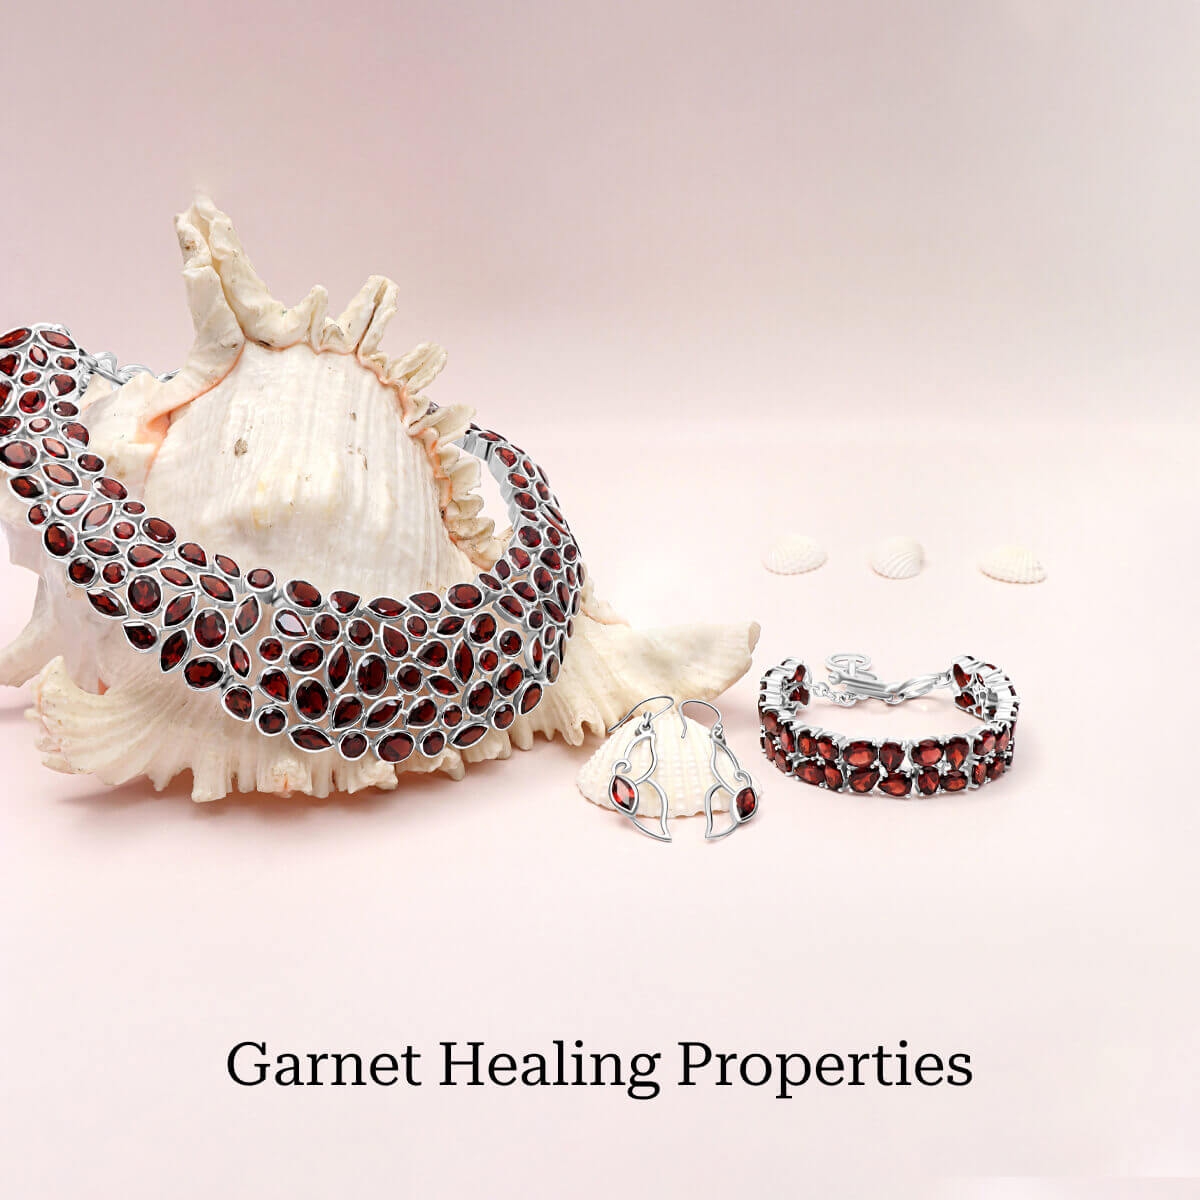 Garnet Meaning And History